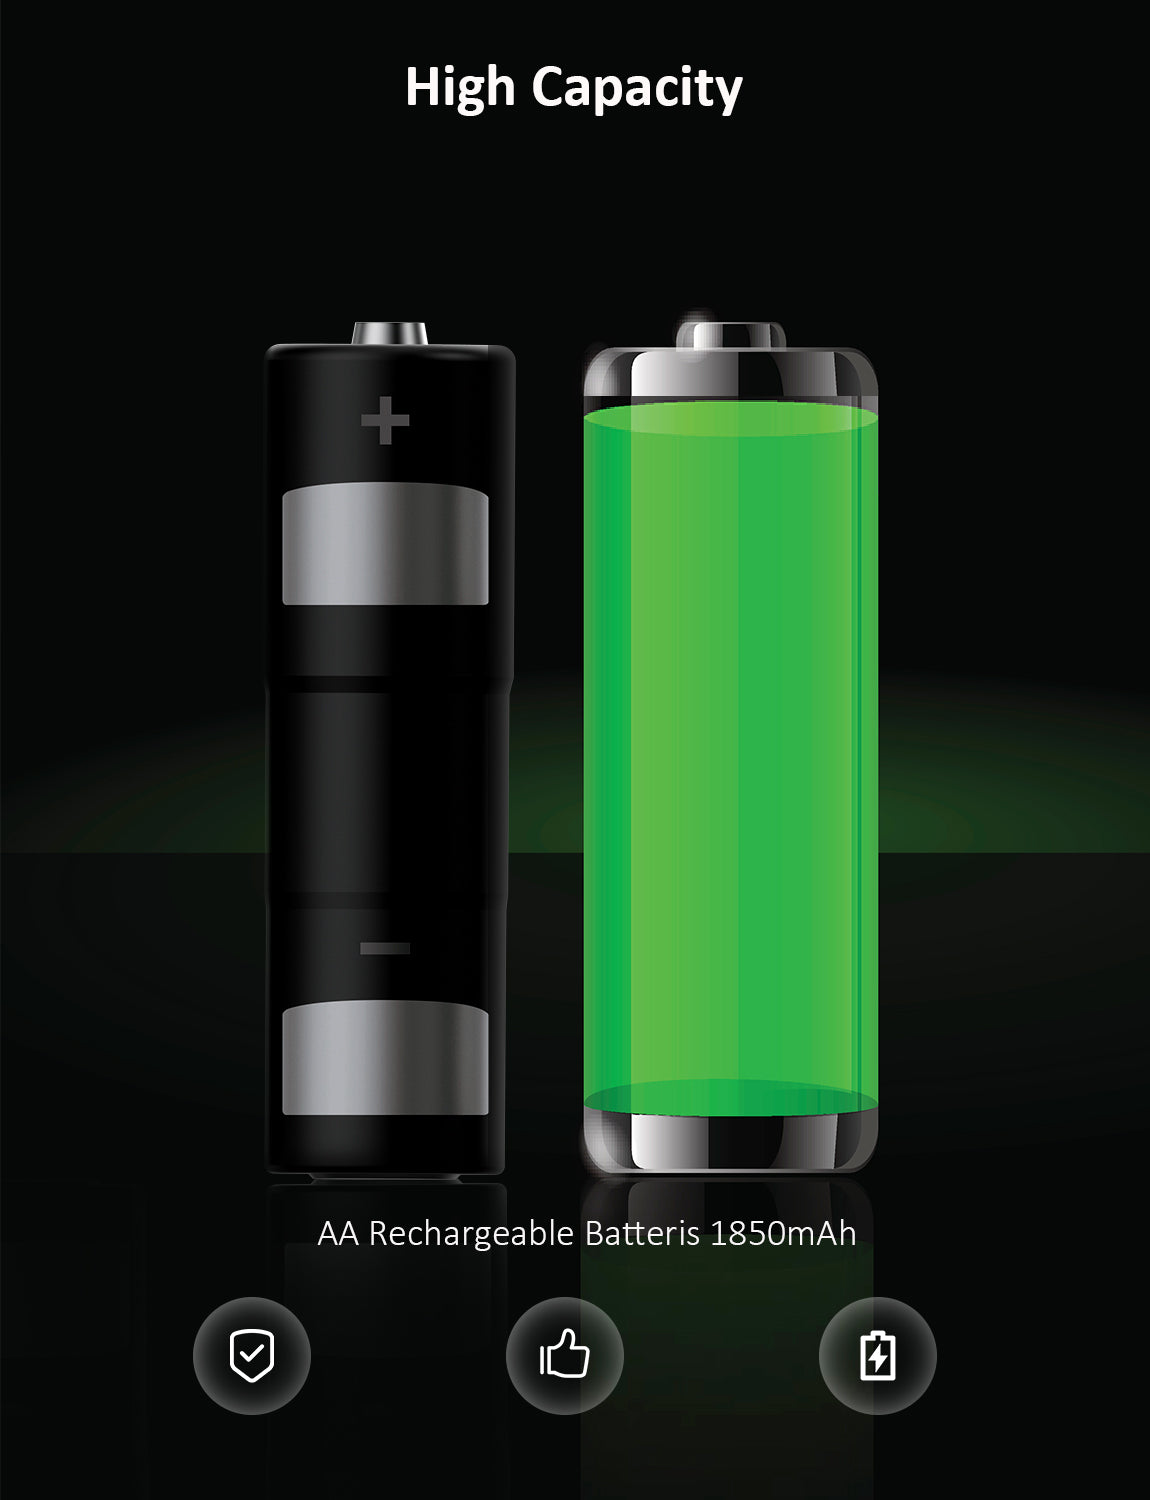 The rechargeable battery has a capacity of 1850mAh.